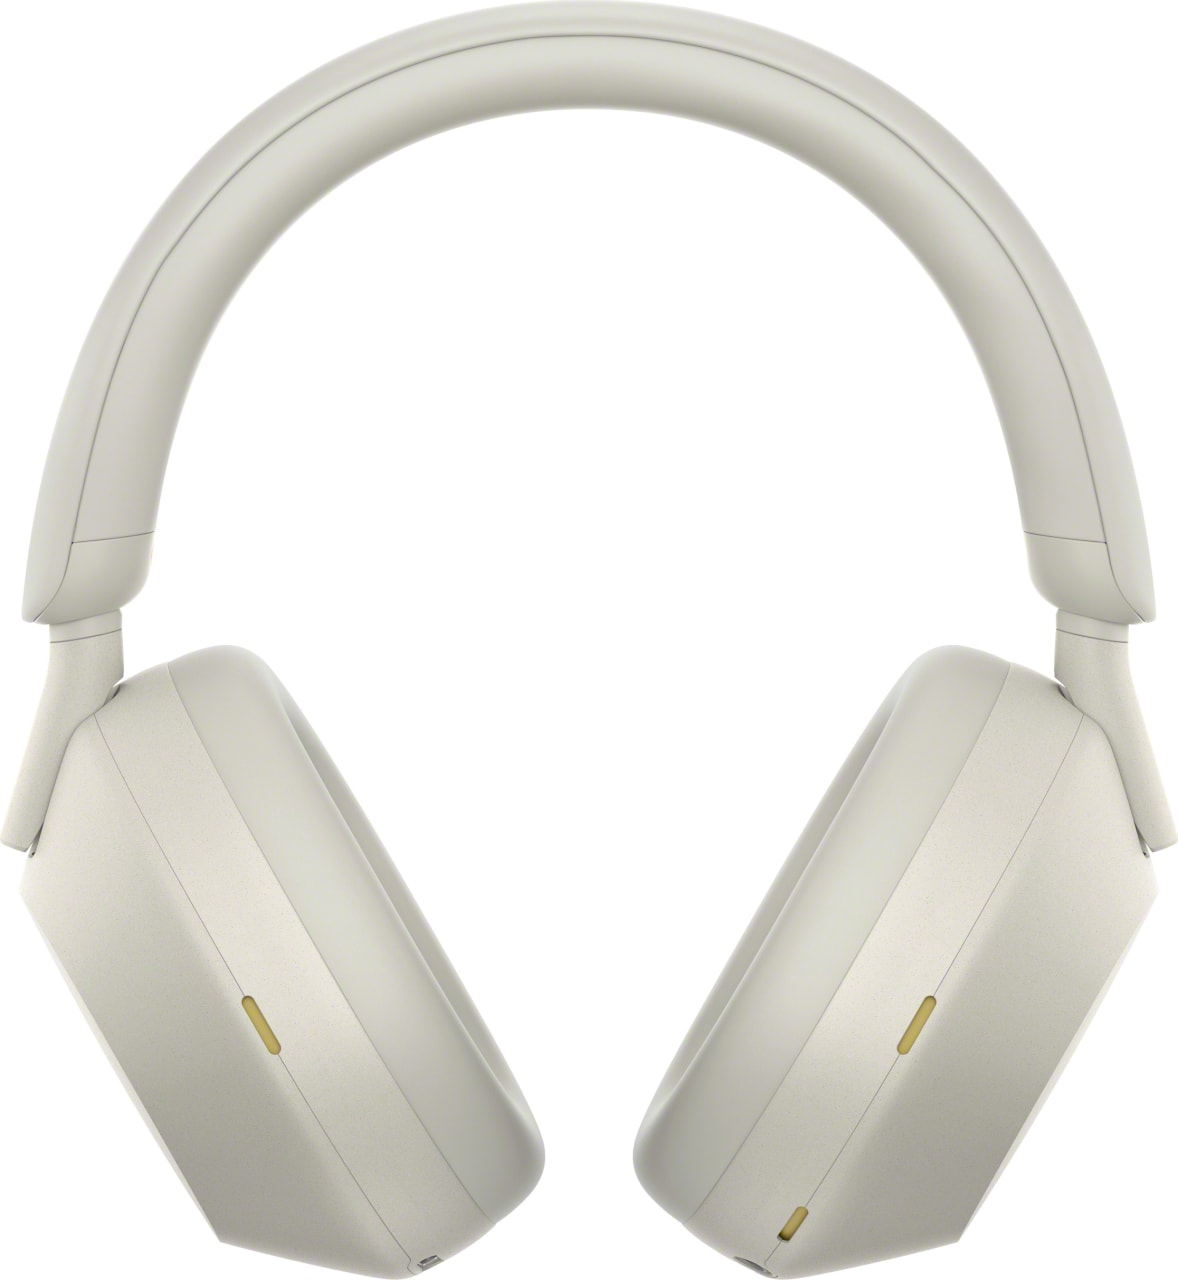 Silver Sony WH-1000 XM5 Noise-cancelling Over-ear Bluetooth headphones.2